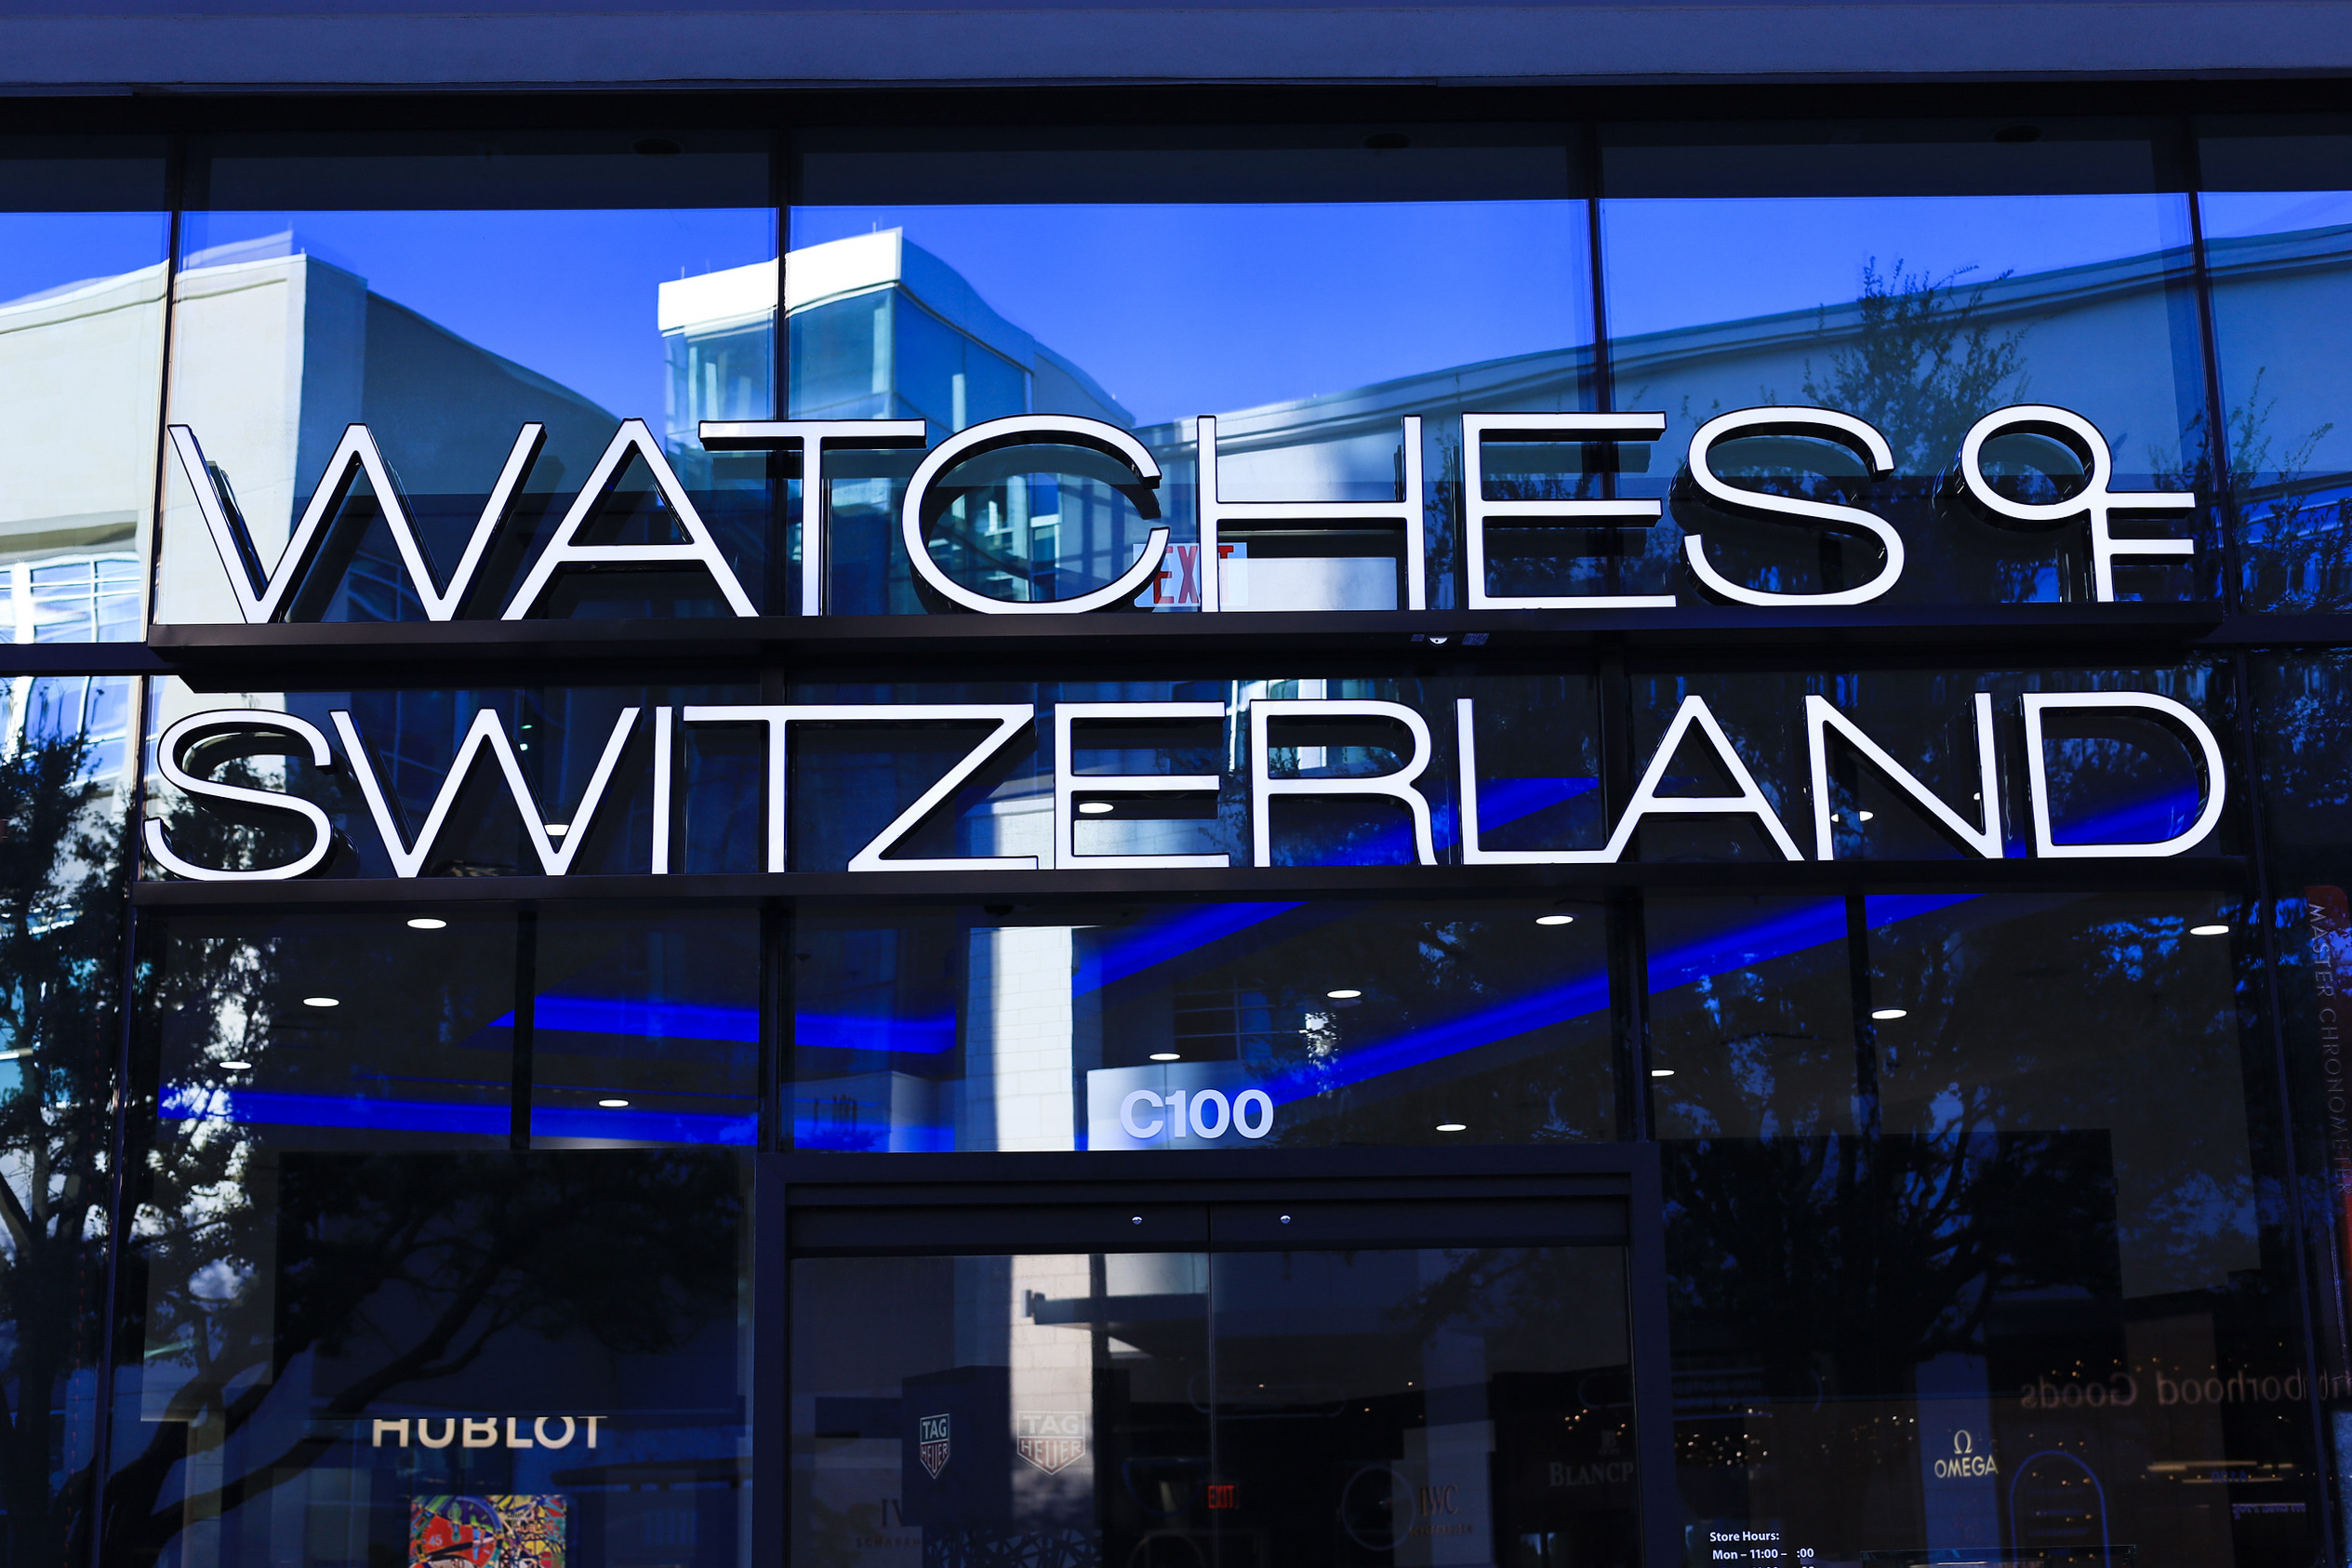 Watches of Switzerland Legacy West Plano Texas facade